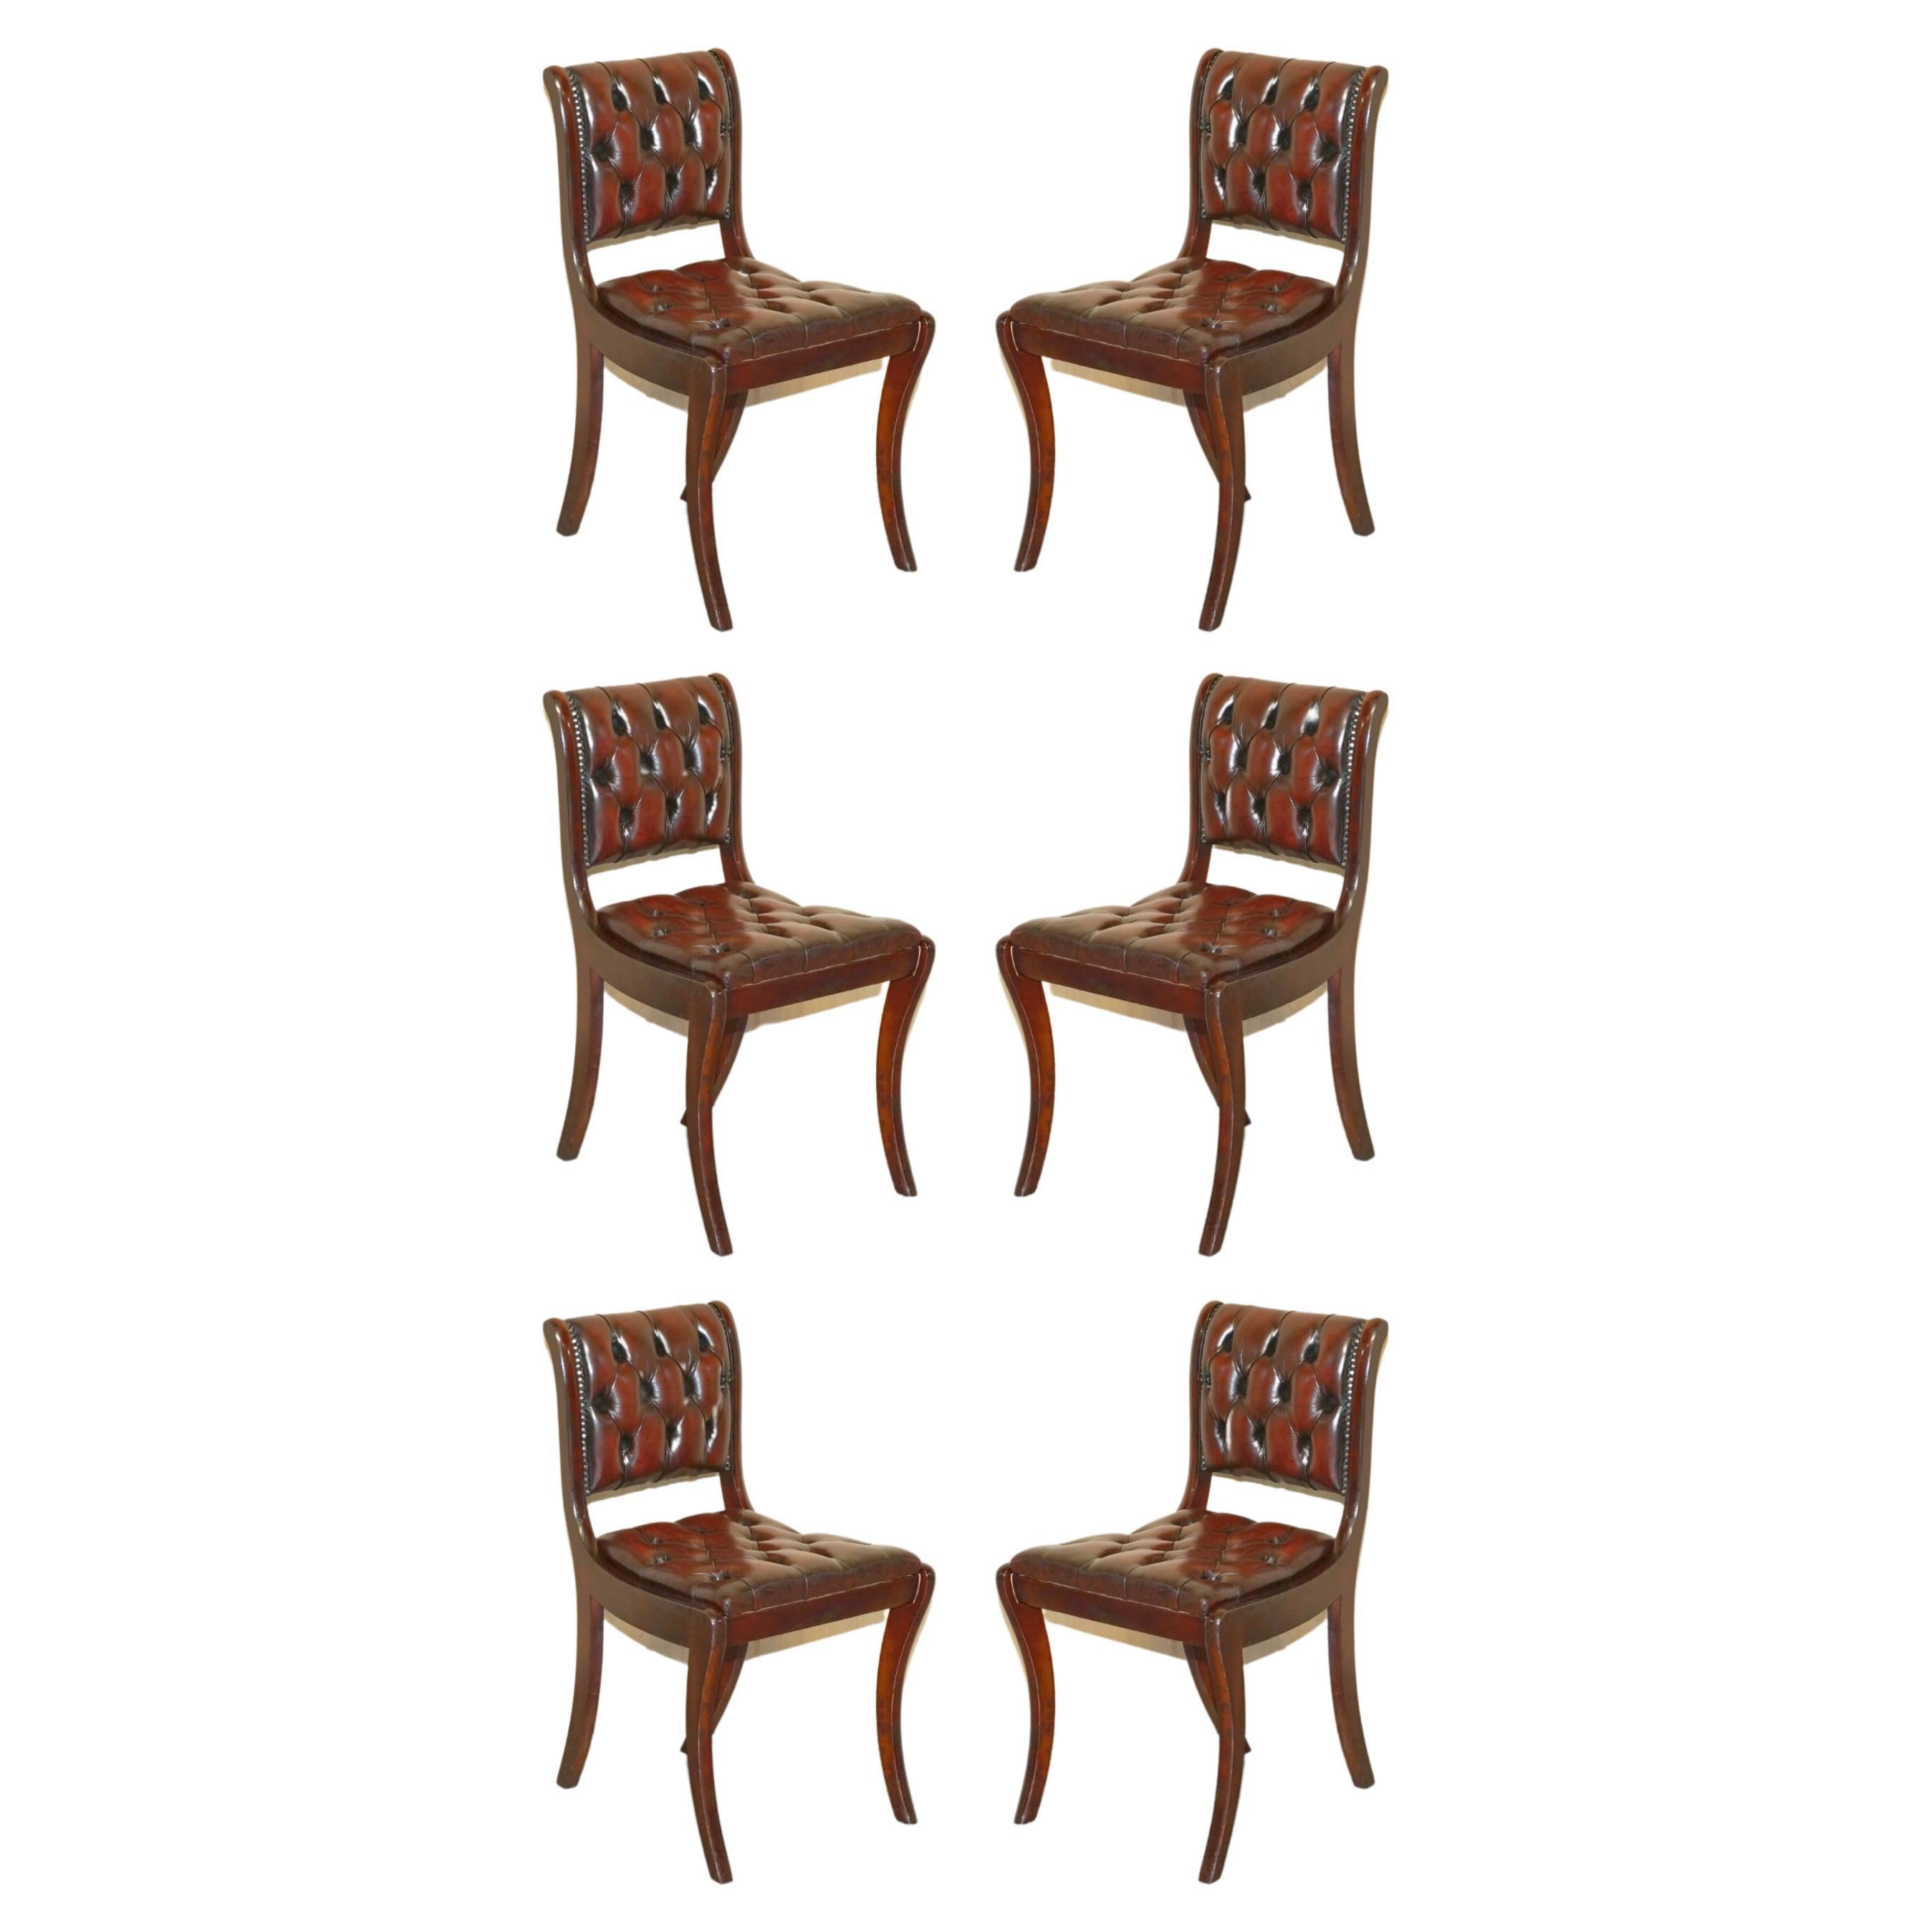 SIX VINTAGE HARDWOOD FULLY RESTORED CHESTERFIELD OXBOOD LEATHER DiNING CHAIRS 6